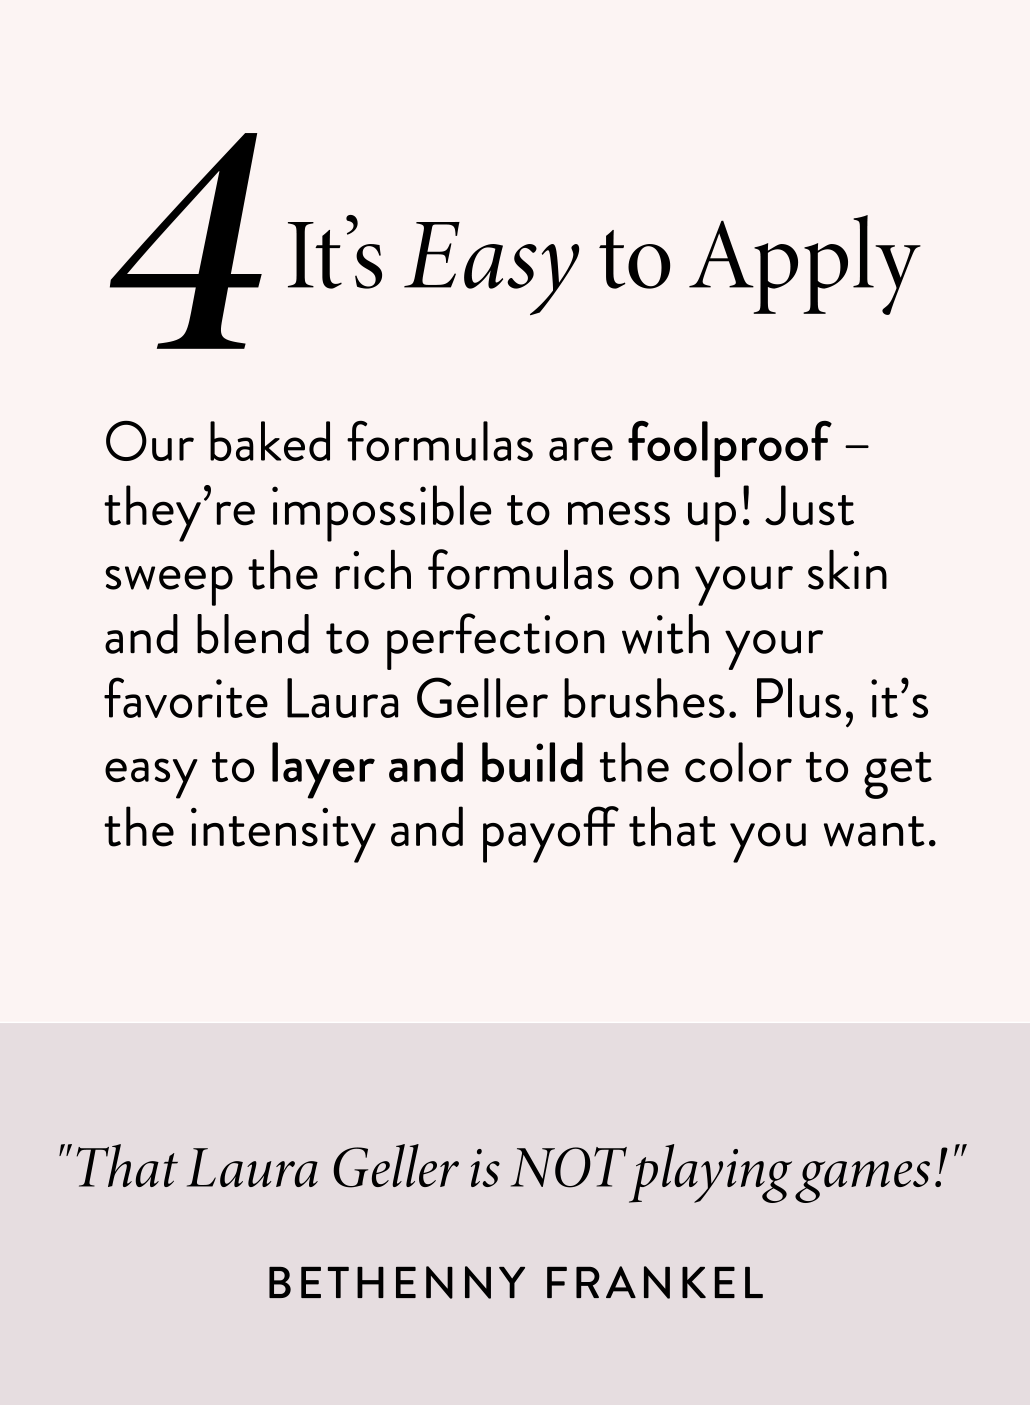 It’s Easy to Apply Our baked formulas are foolproof – they’re impossible to mess up! Just sweep the rich formulas on your skin and blend to perfection with your favorite Laura Geller brushes. Plus, it’s easy to layer and build the color to get the intensity and payoff that you want.